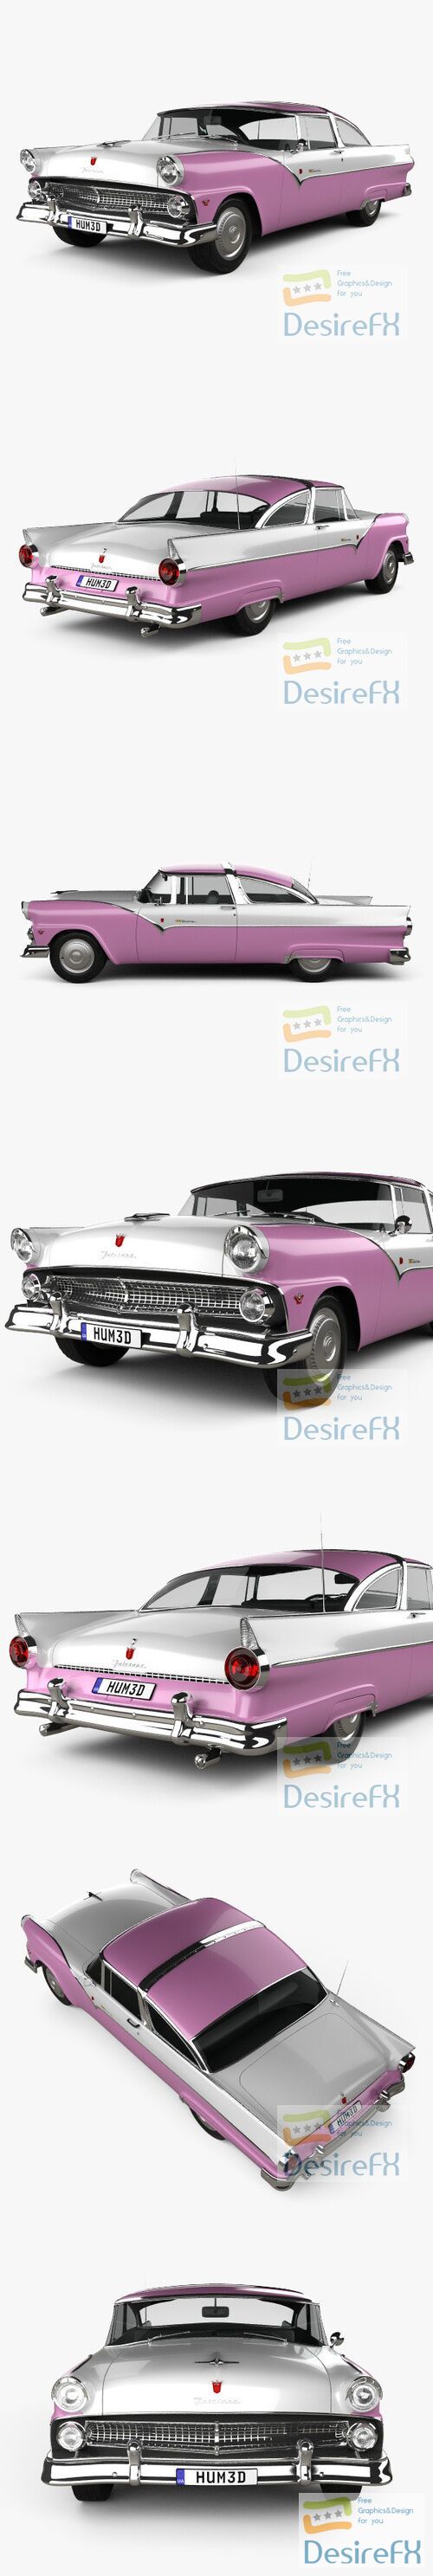 Ford Crown Victoria 1955 3D Model